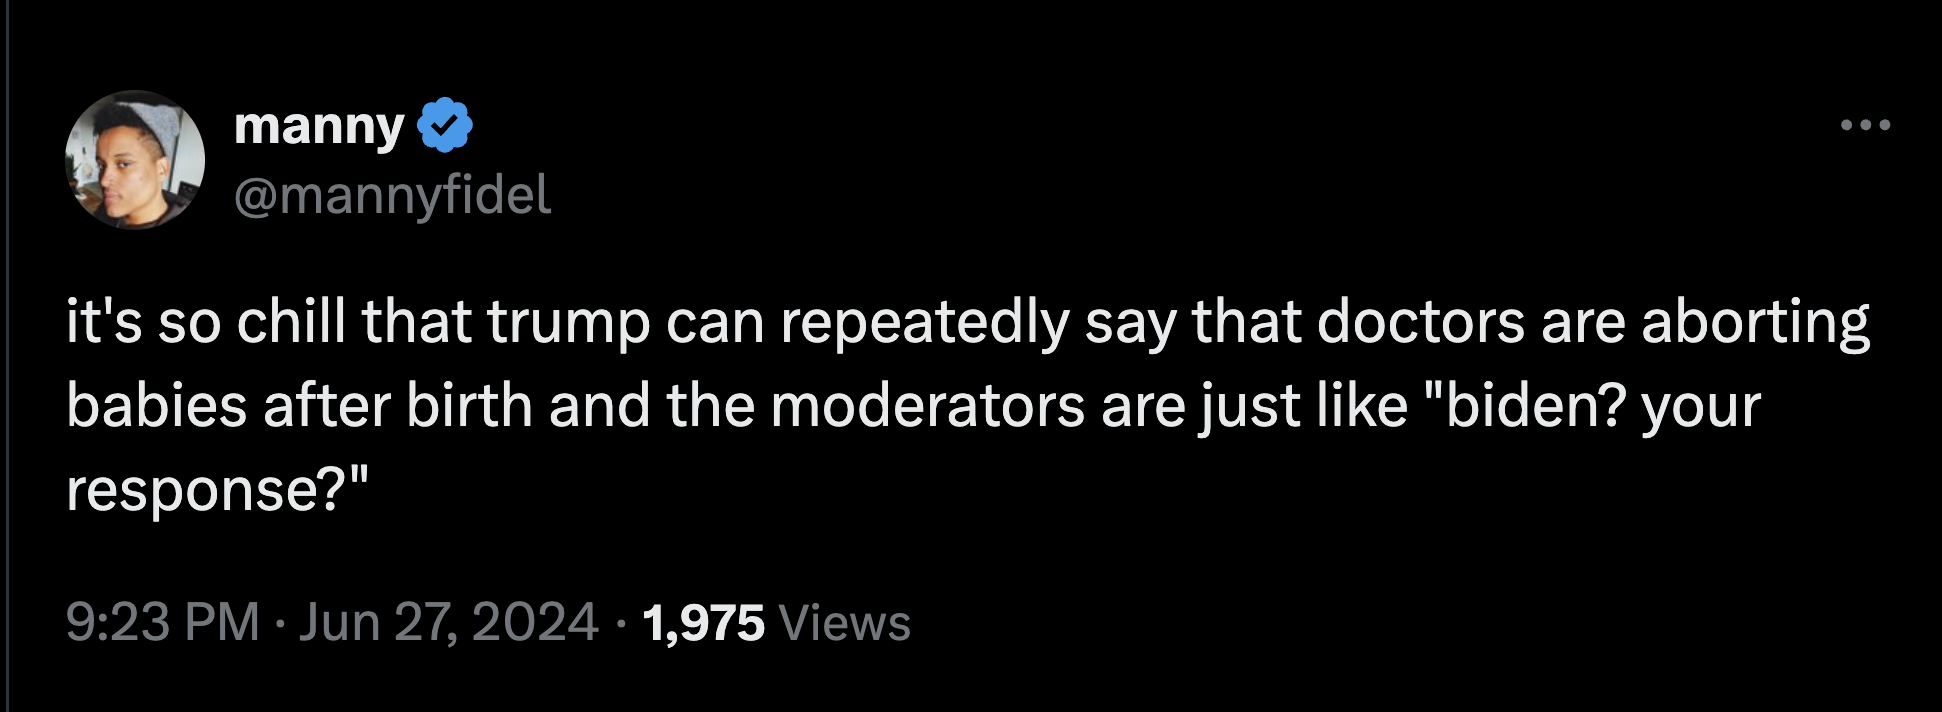 screenshot - manny it's so chill that trump can repeatedly say that doctors are aborting babies after birth and the moderators are just "biden? your response?" 1,975 Views